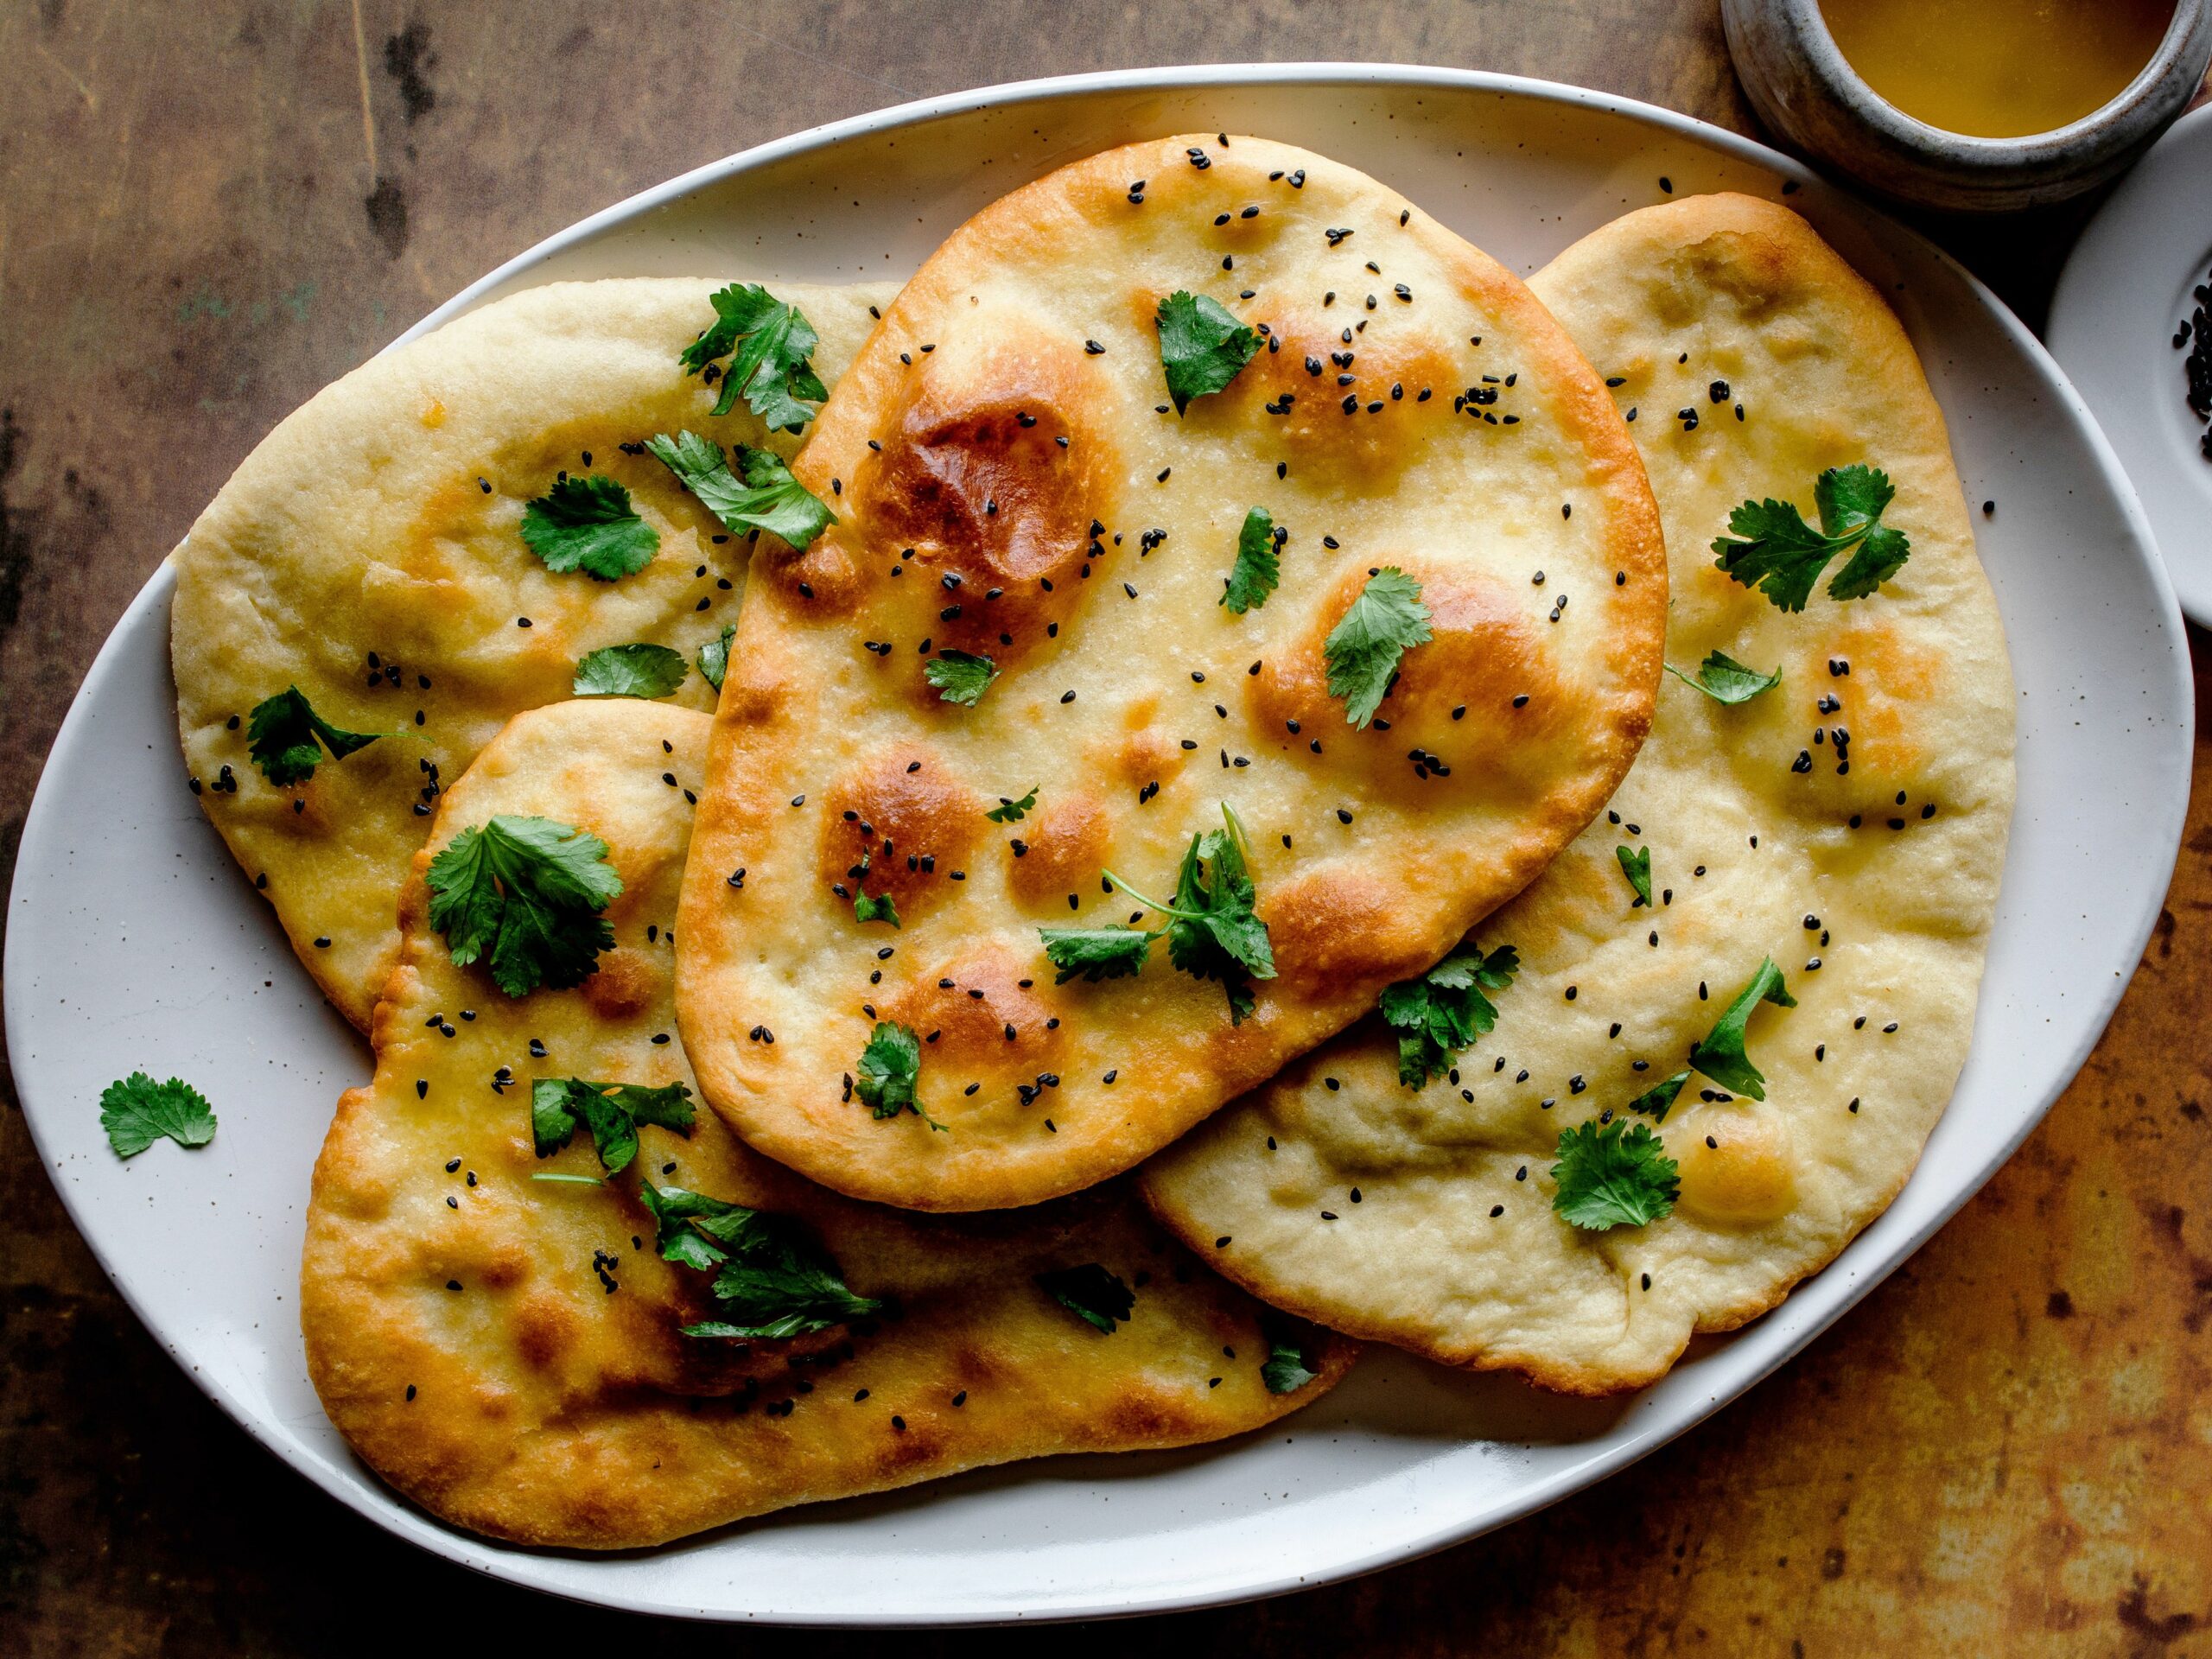 Plate of Naan